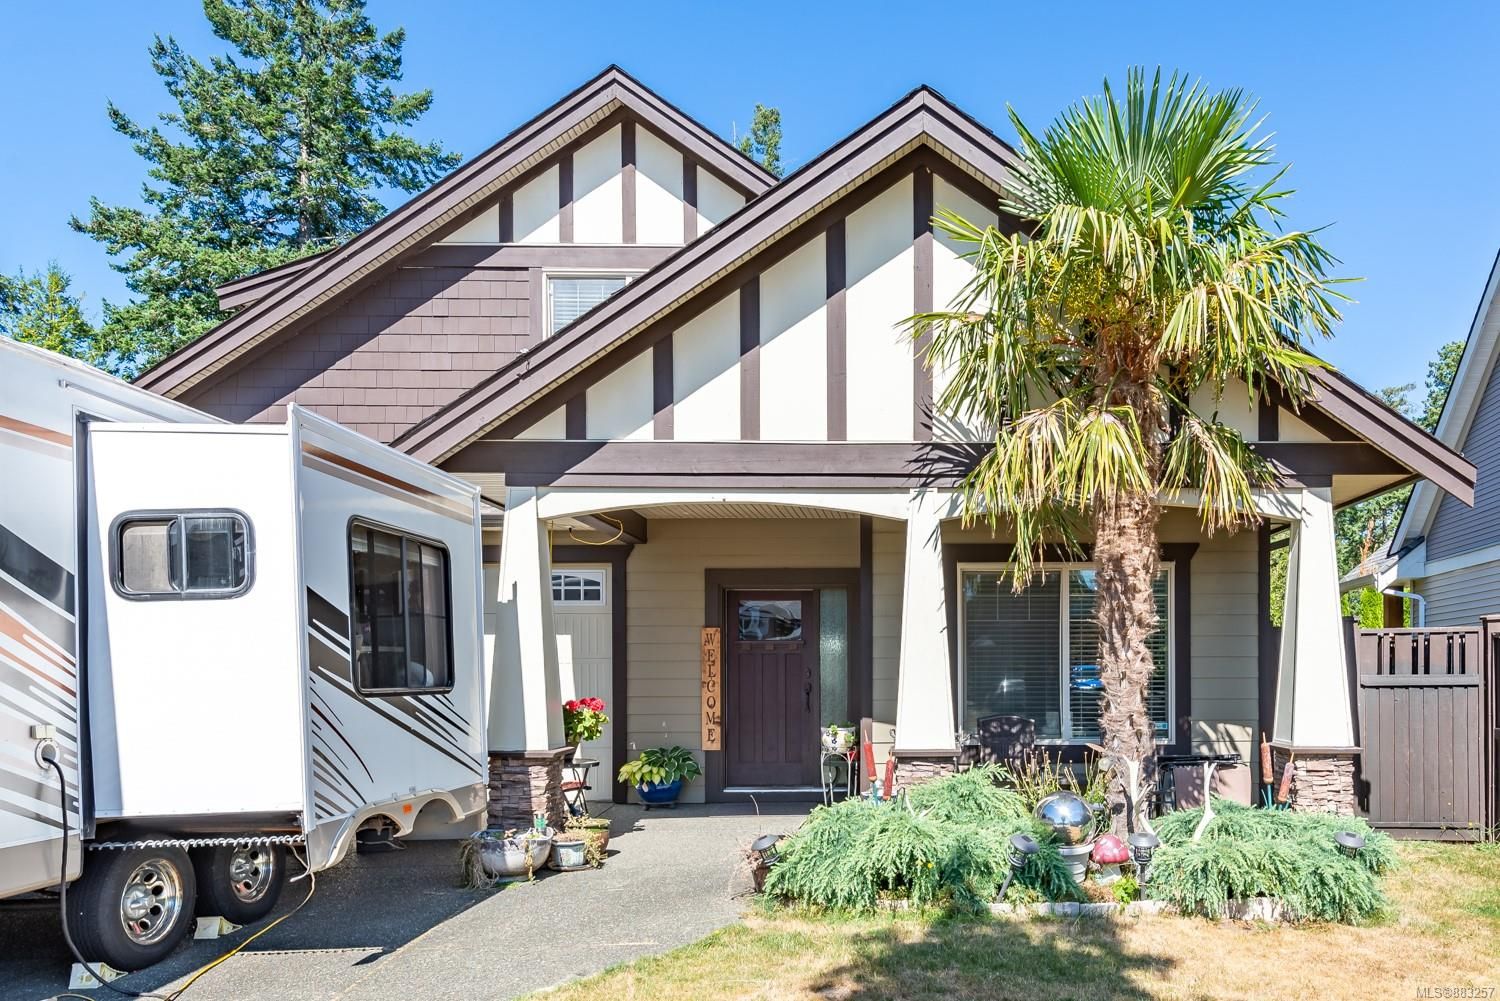 Main Photo: 311 Forester Ave in Comox: CV Comox (Town of) House for sale (Comox Valley)  : MLS®# 883257